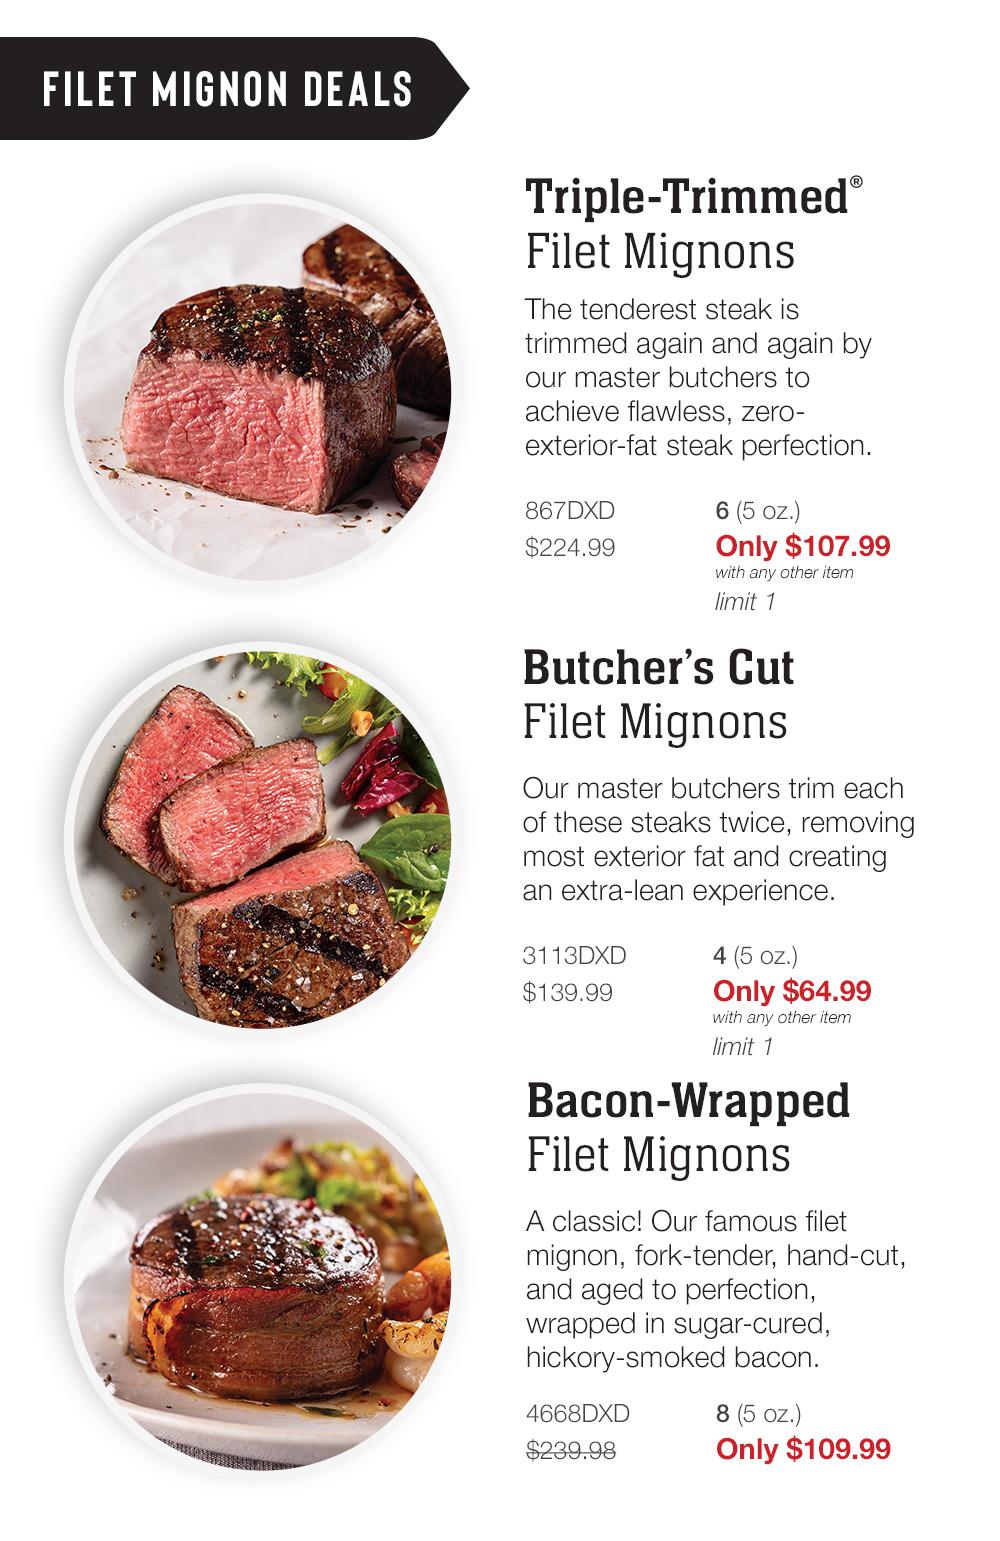 FILET MIGNON Deals | Triple-Trimmed® Filet Mignons - The tenderest steak is trimmed again and again by our master butchers to achieve flawless, zero-exterior-fat steak perfection. - 867DXD 6 (5 oz.) $224.99    Only $107.99 with any other item limit 1 | Butcher's Cut Filet Mignons - Our master butchers trim each of these steaks twice, removing most exterior fat and creating an extra-lean experience. - 3113DXD 4 (5 oz.) $139.99   Only $67.99   with any other item limit 1 | Bacon-Wrapped Filet Mignons - A classic! Our famous filet mignon, fork-tender, hand-cut, and aged to perfection, wrapped in sugar-cured, hickory-smoked bacon. - 4668DXD 8 (5 oz.) $239.98  Only $109.99